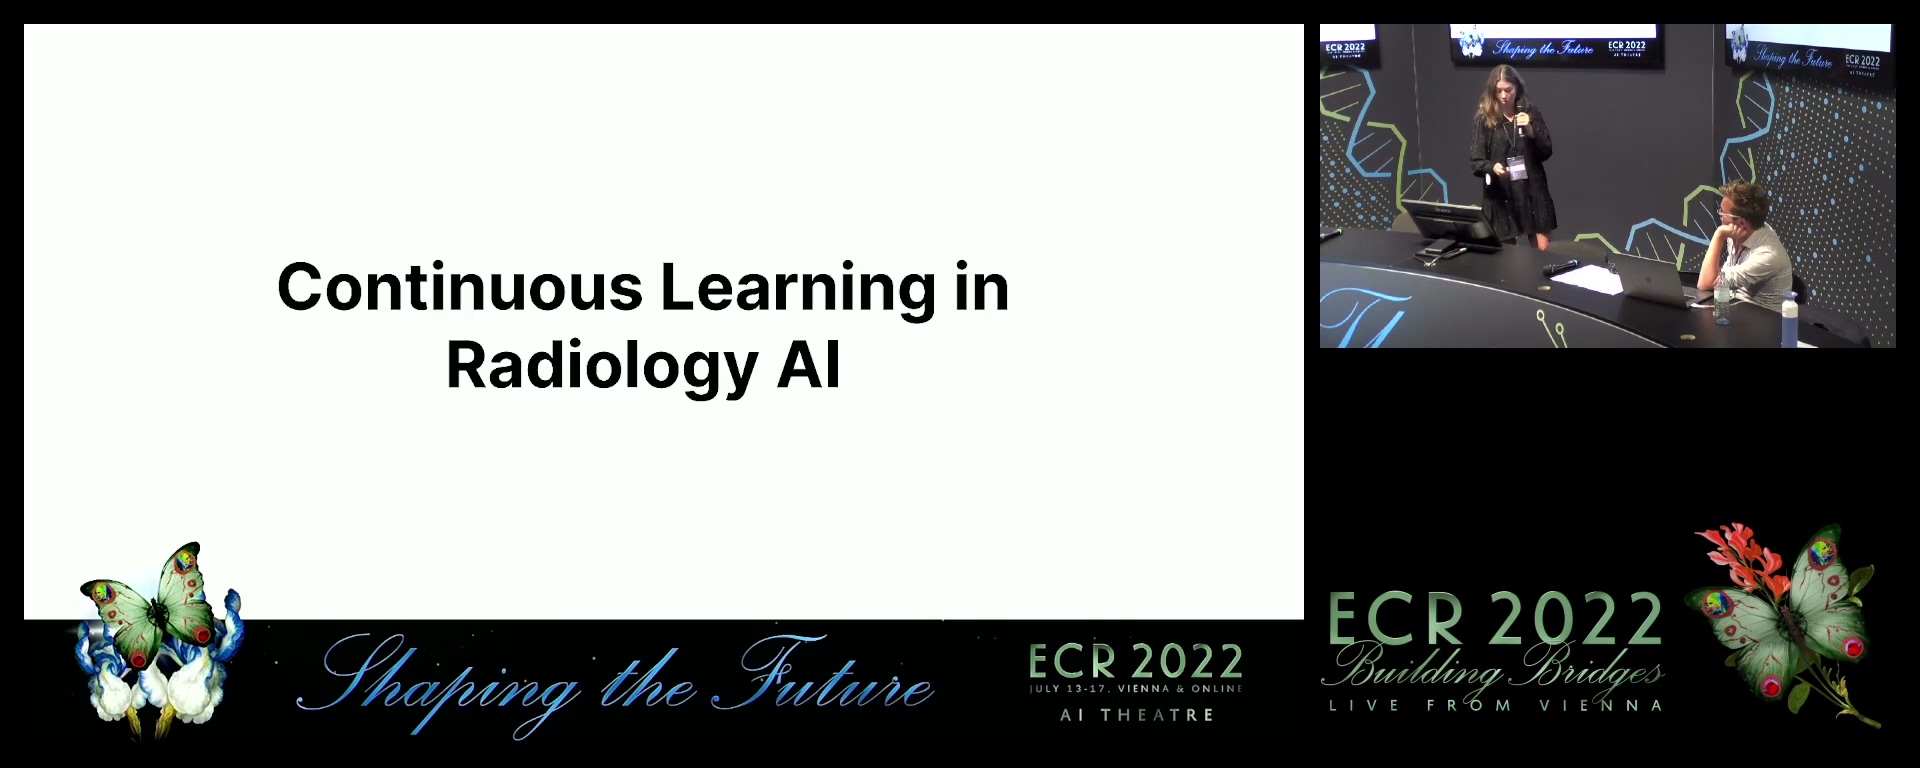 Continuous Learning in Radiology AI